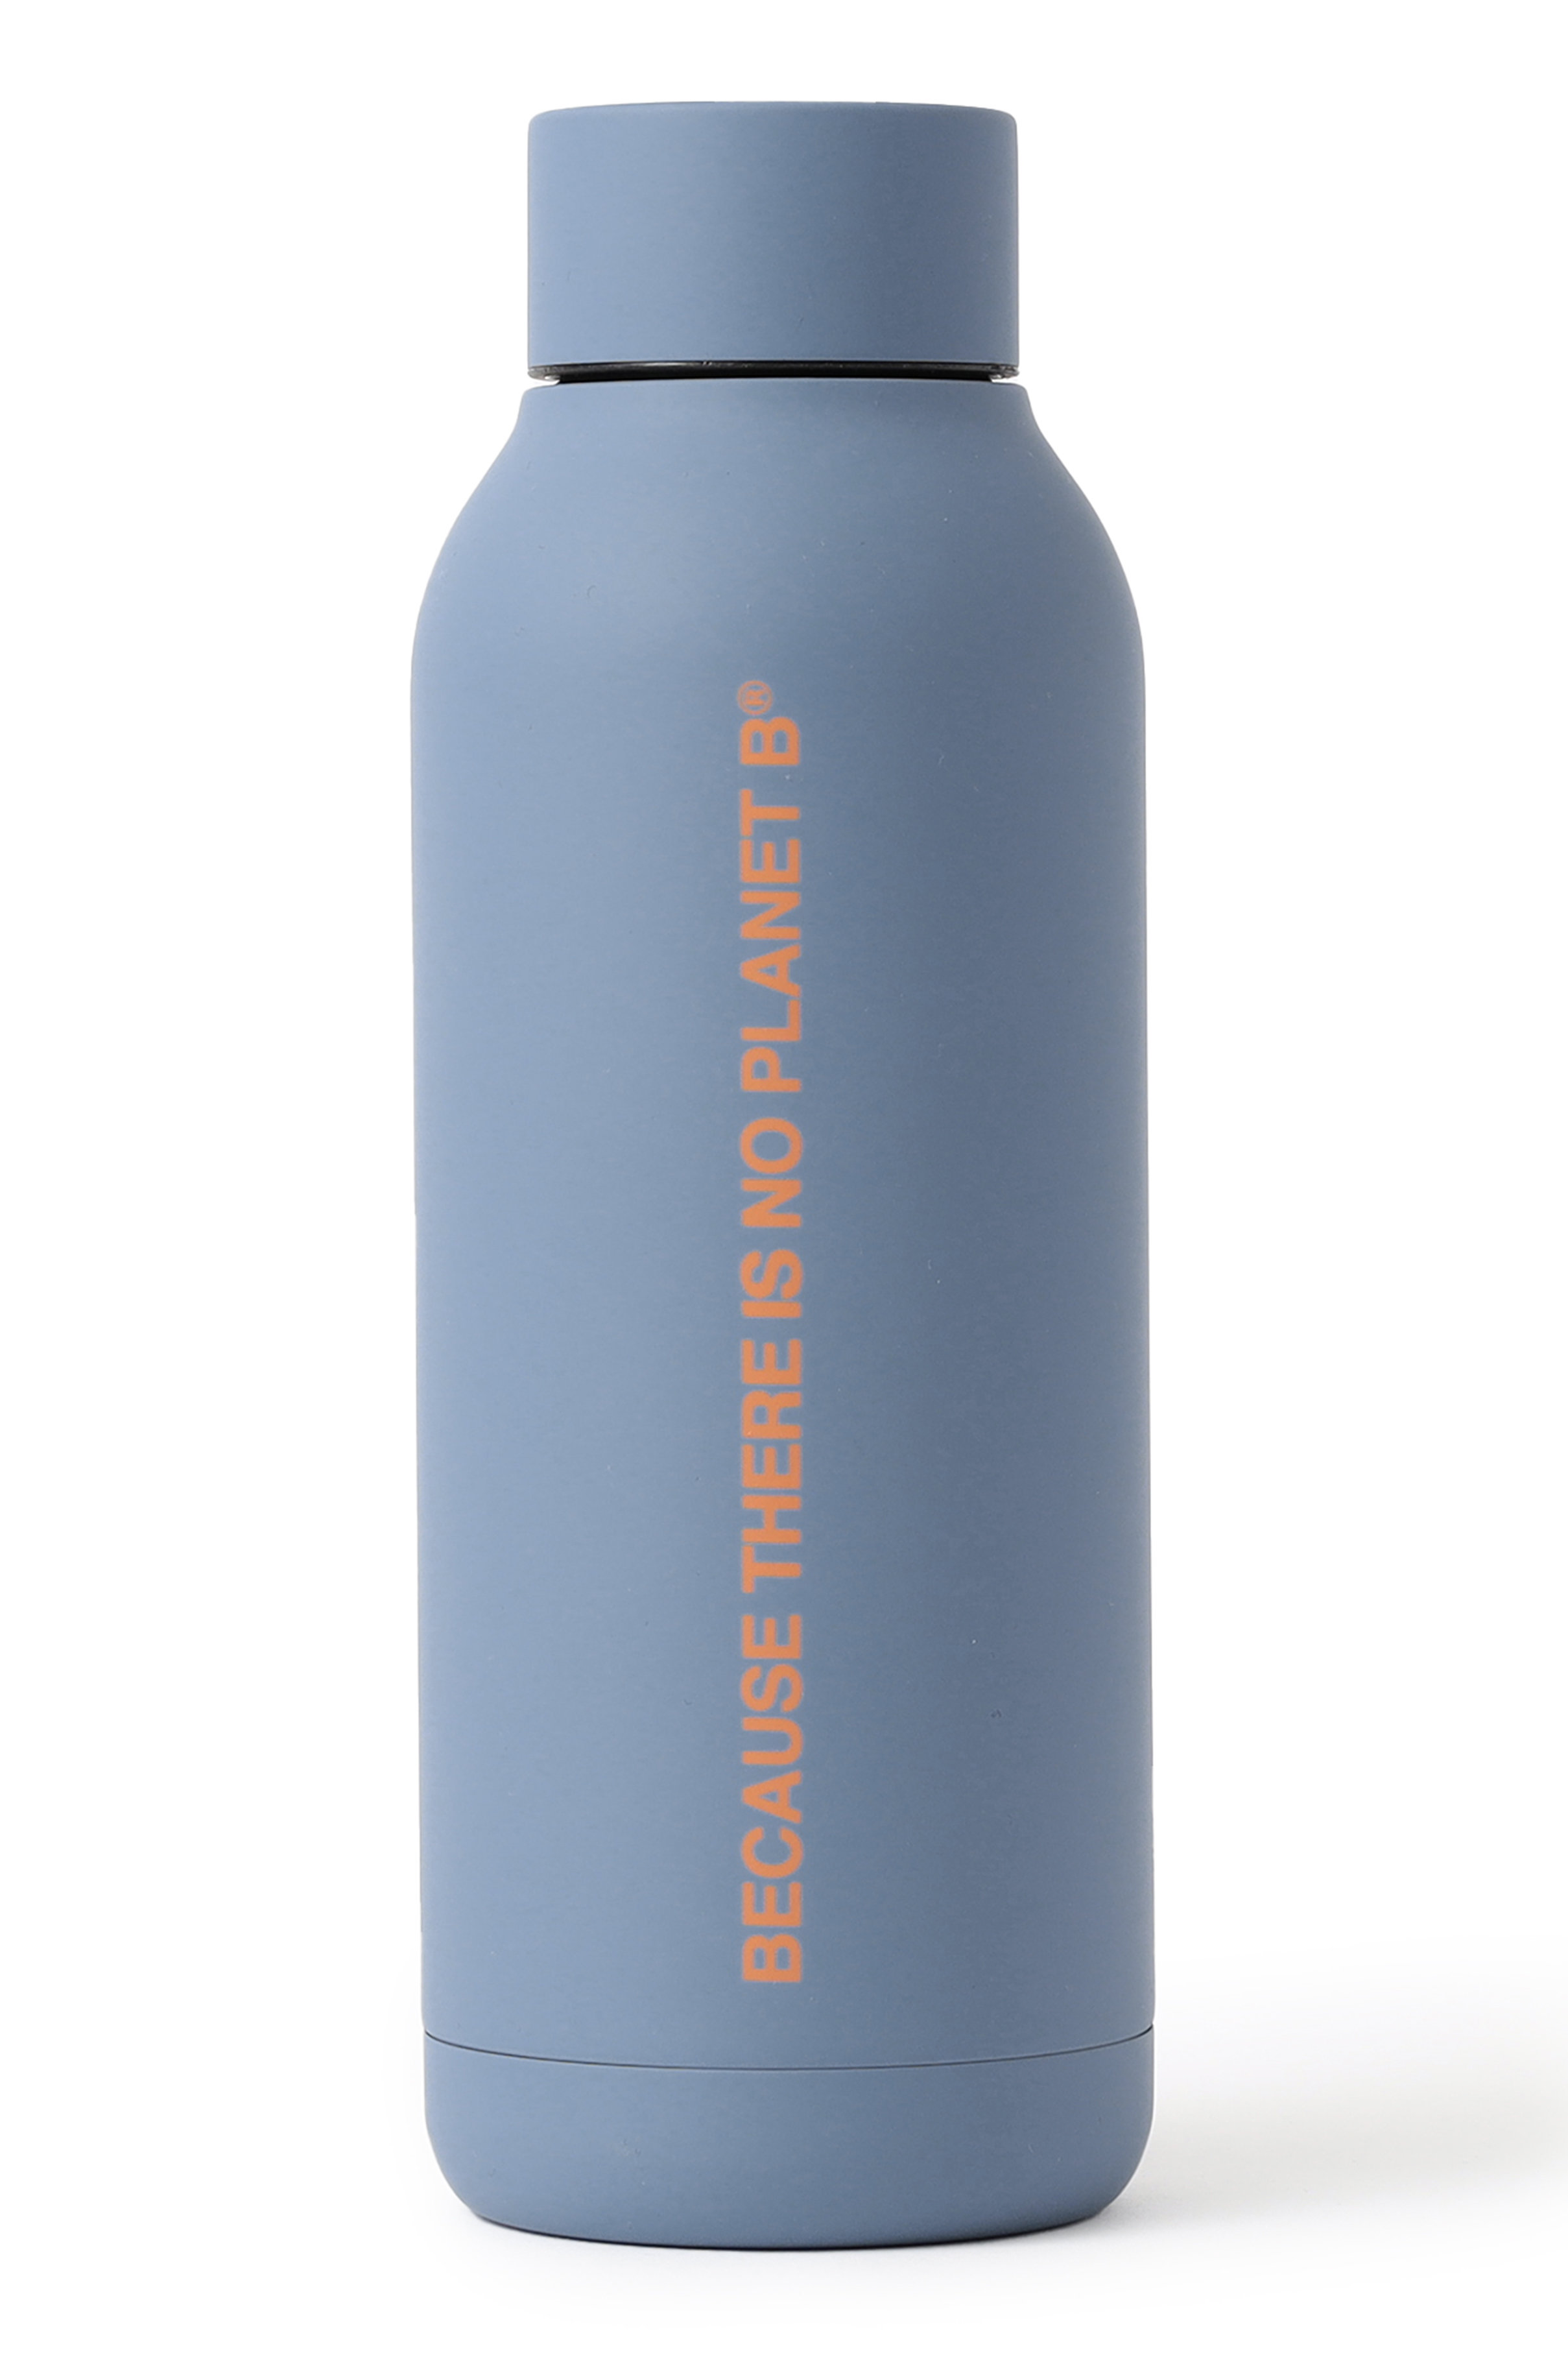 【UNISEX】BECAUSE ボトル / BECAUSE STAINLESS STEEL BOTTLE